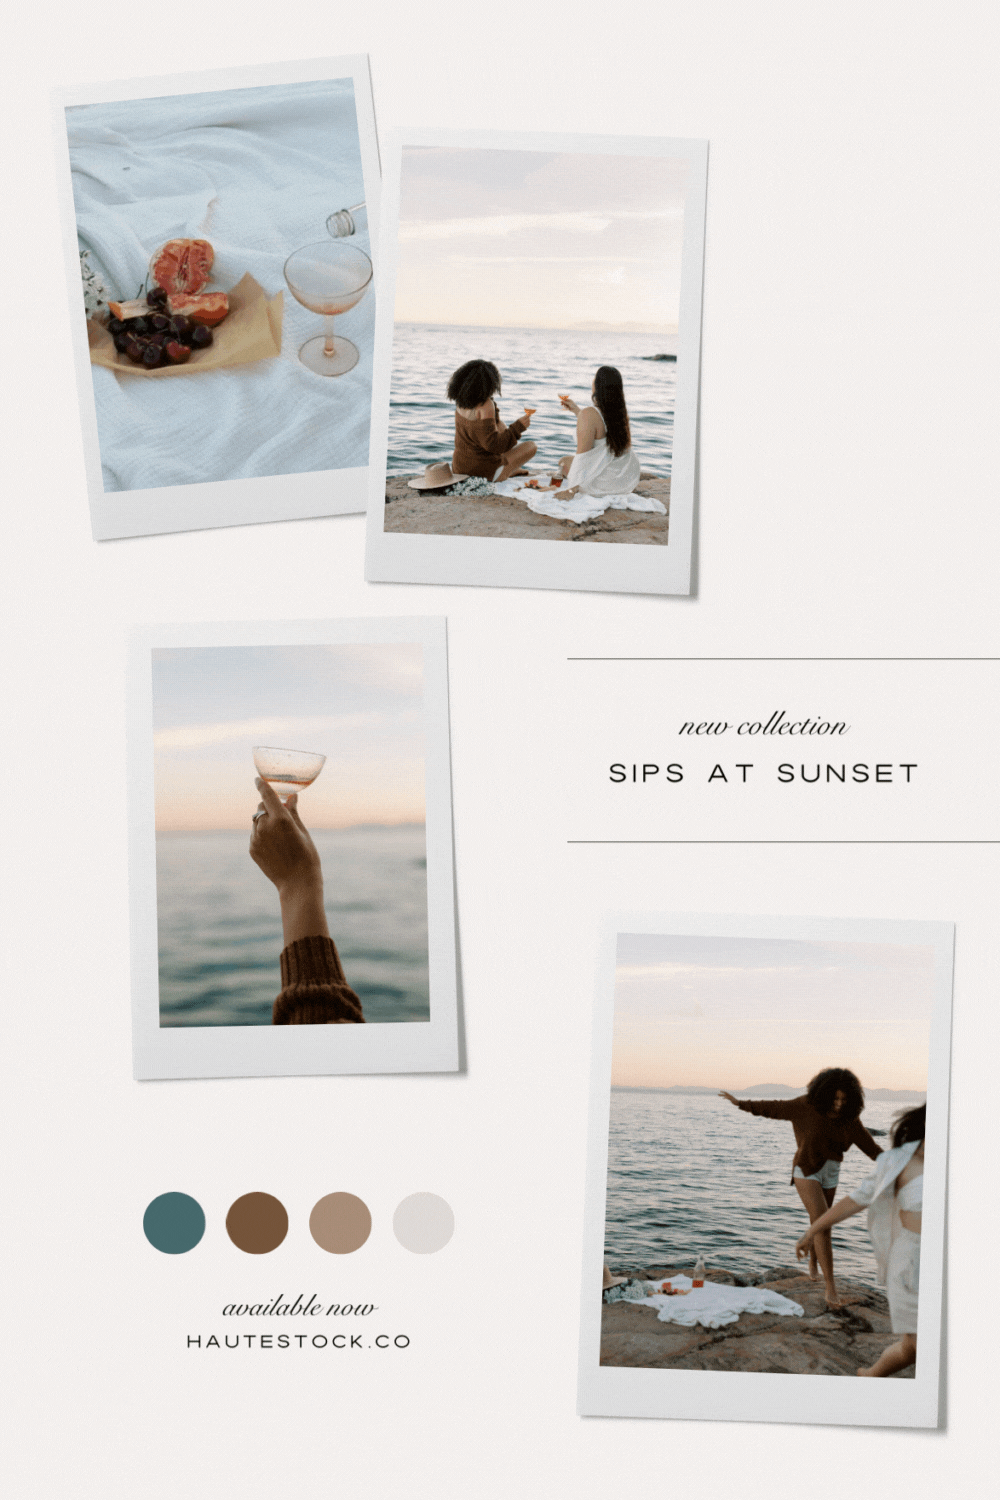 Mood board for Sips at Sunset, a playful and fun stock photos and videos collection featuring images of friends having a rejuvenating evening at beach, sipping wine and having fun.